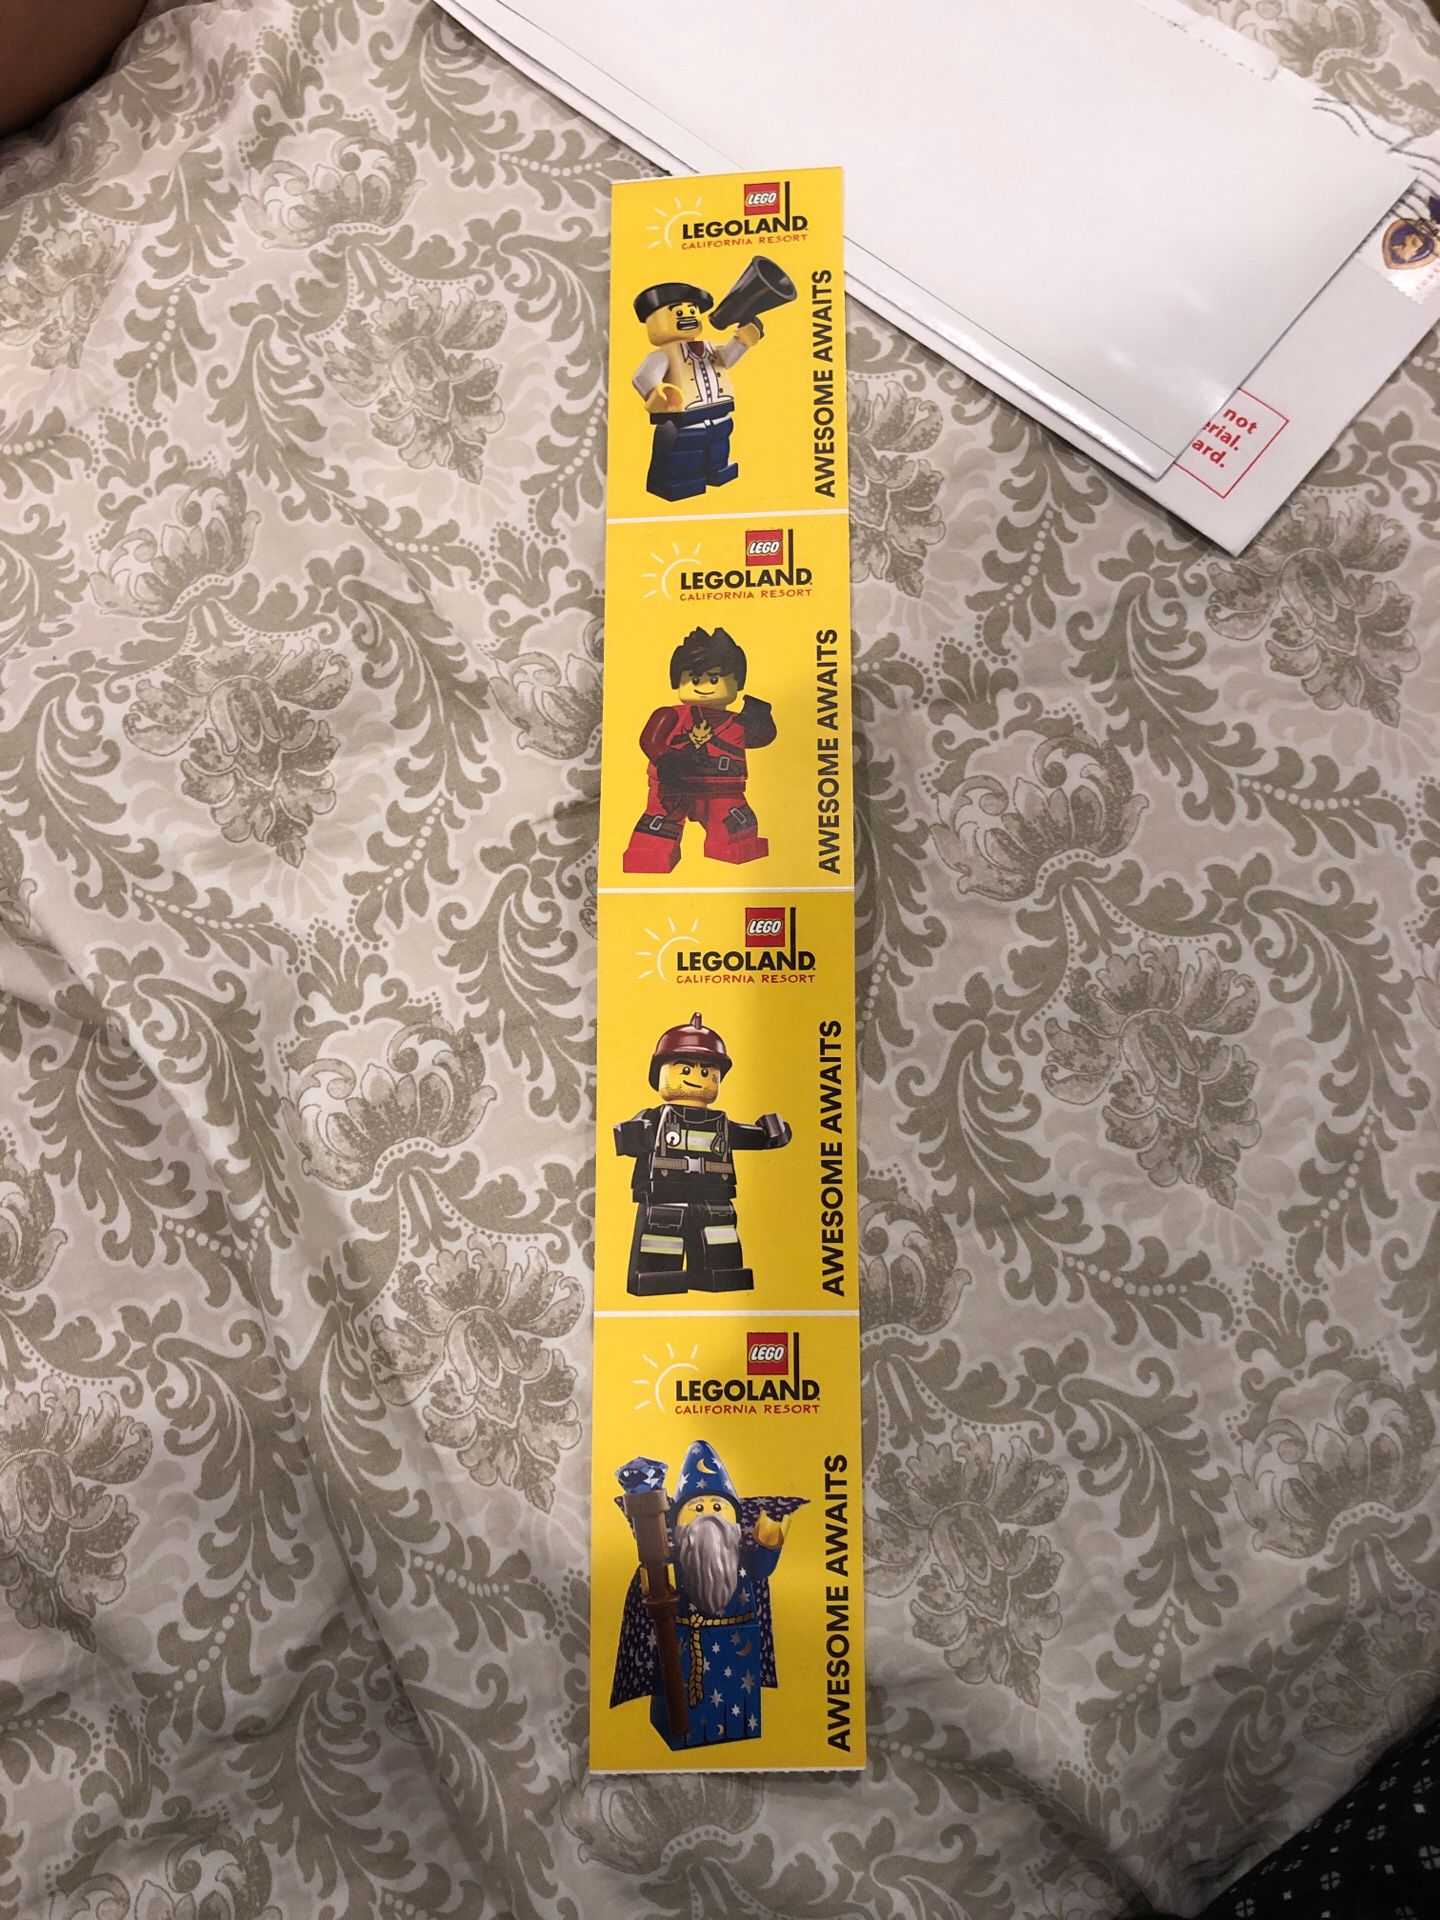 LEGO LAND TICKETS 🎫 200 for 4